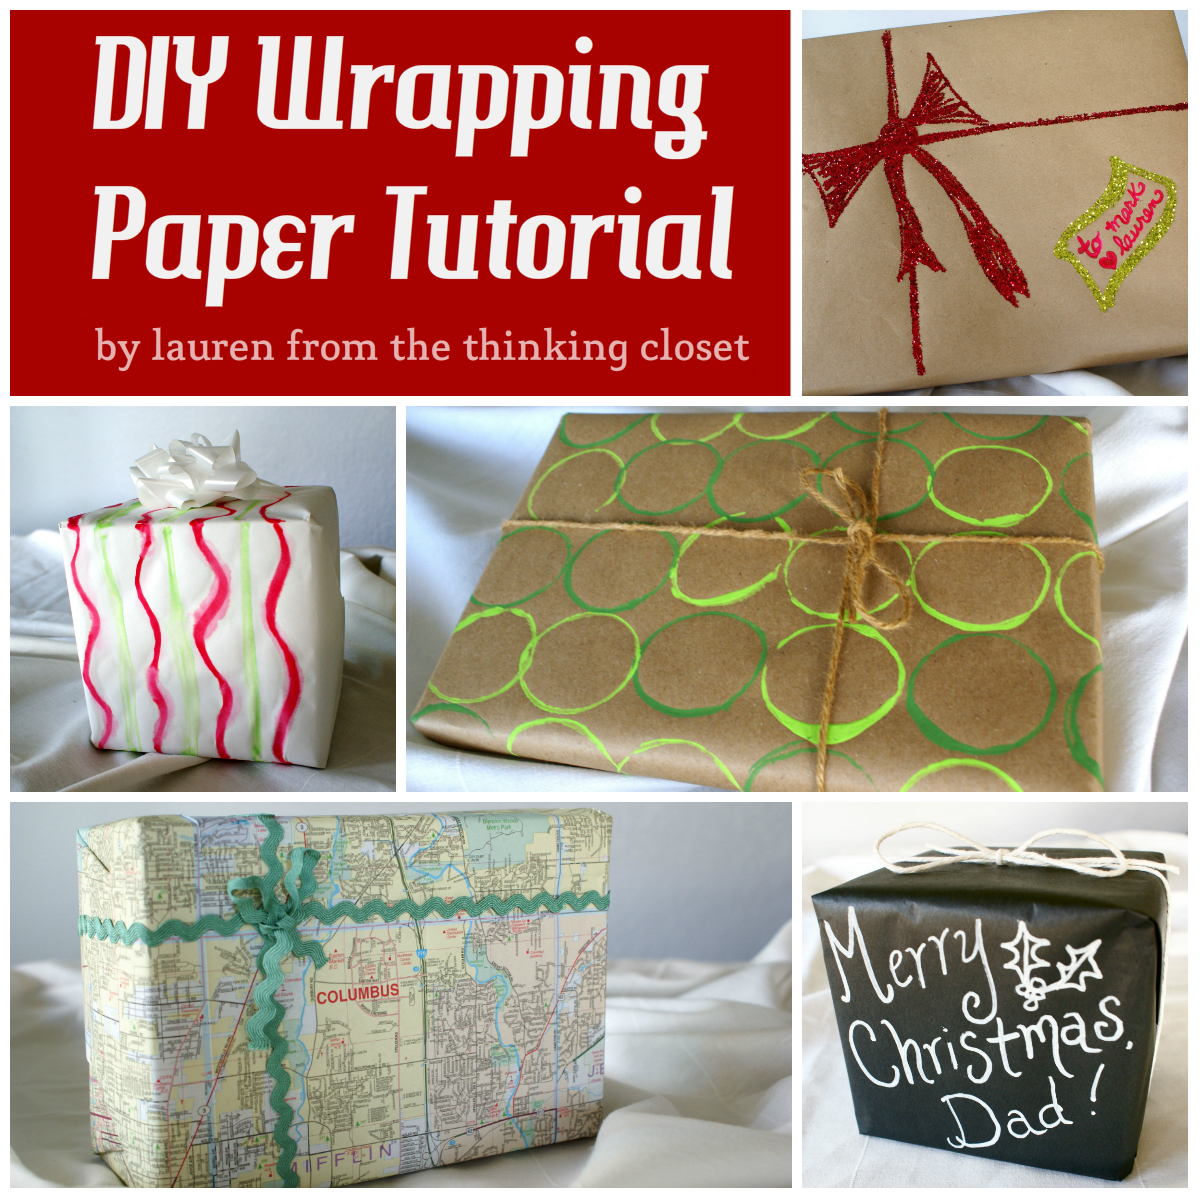 DIY Wrapping Paper Tutorial via The Thinking Closet